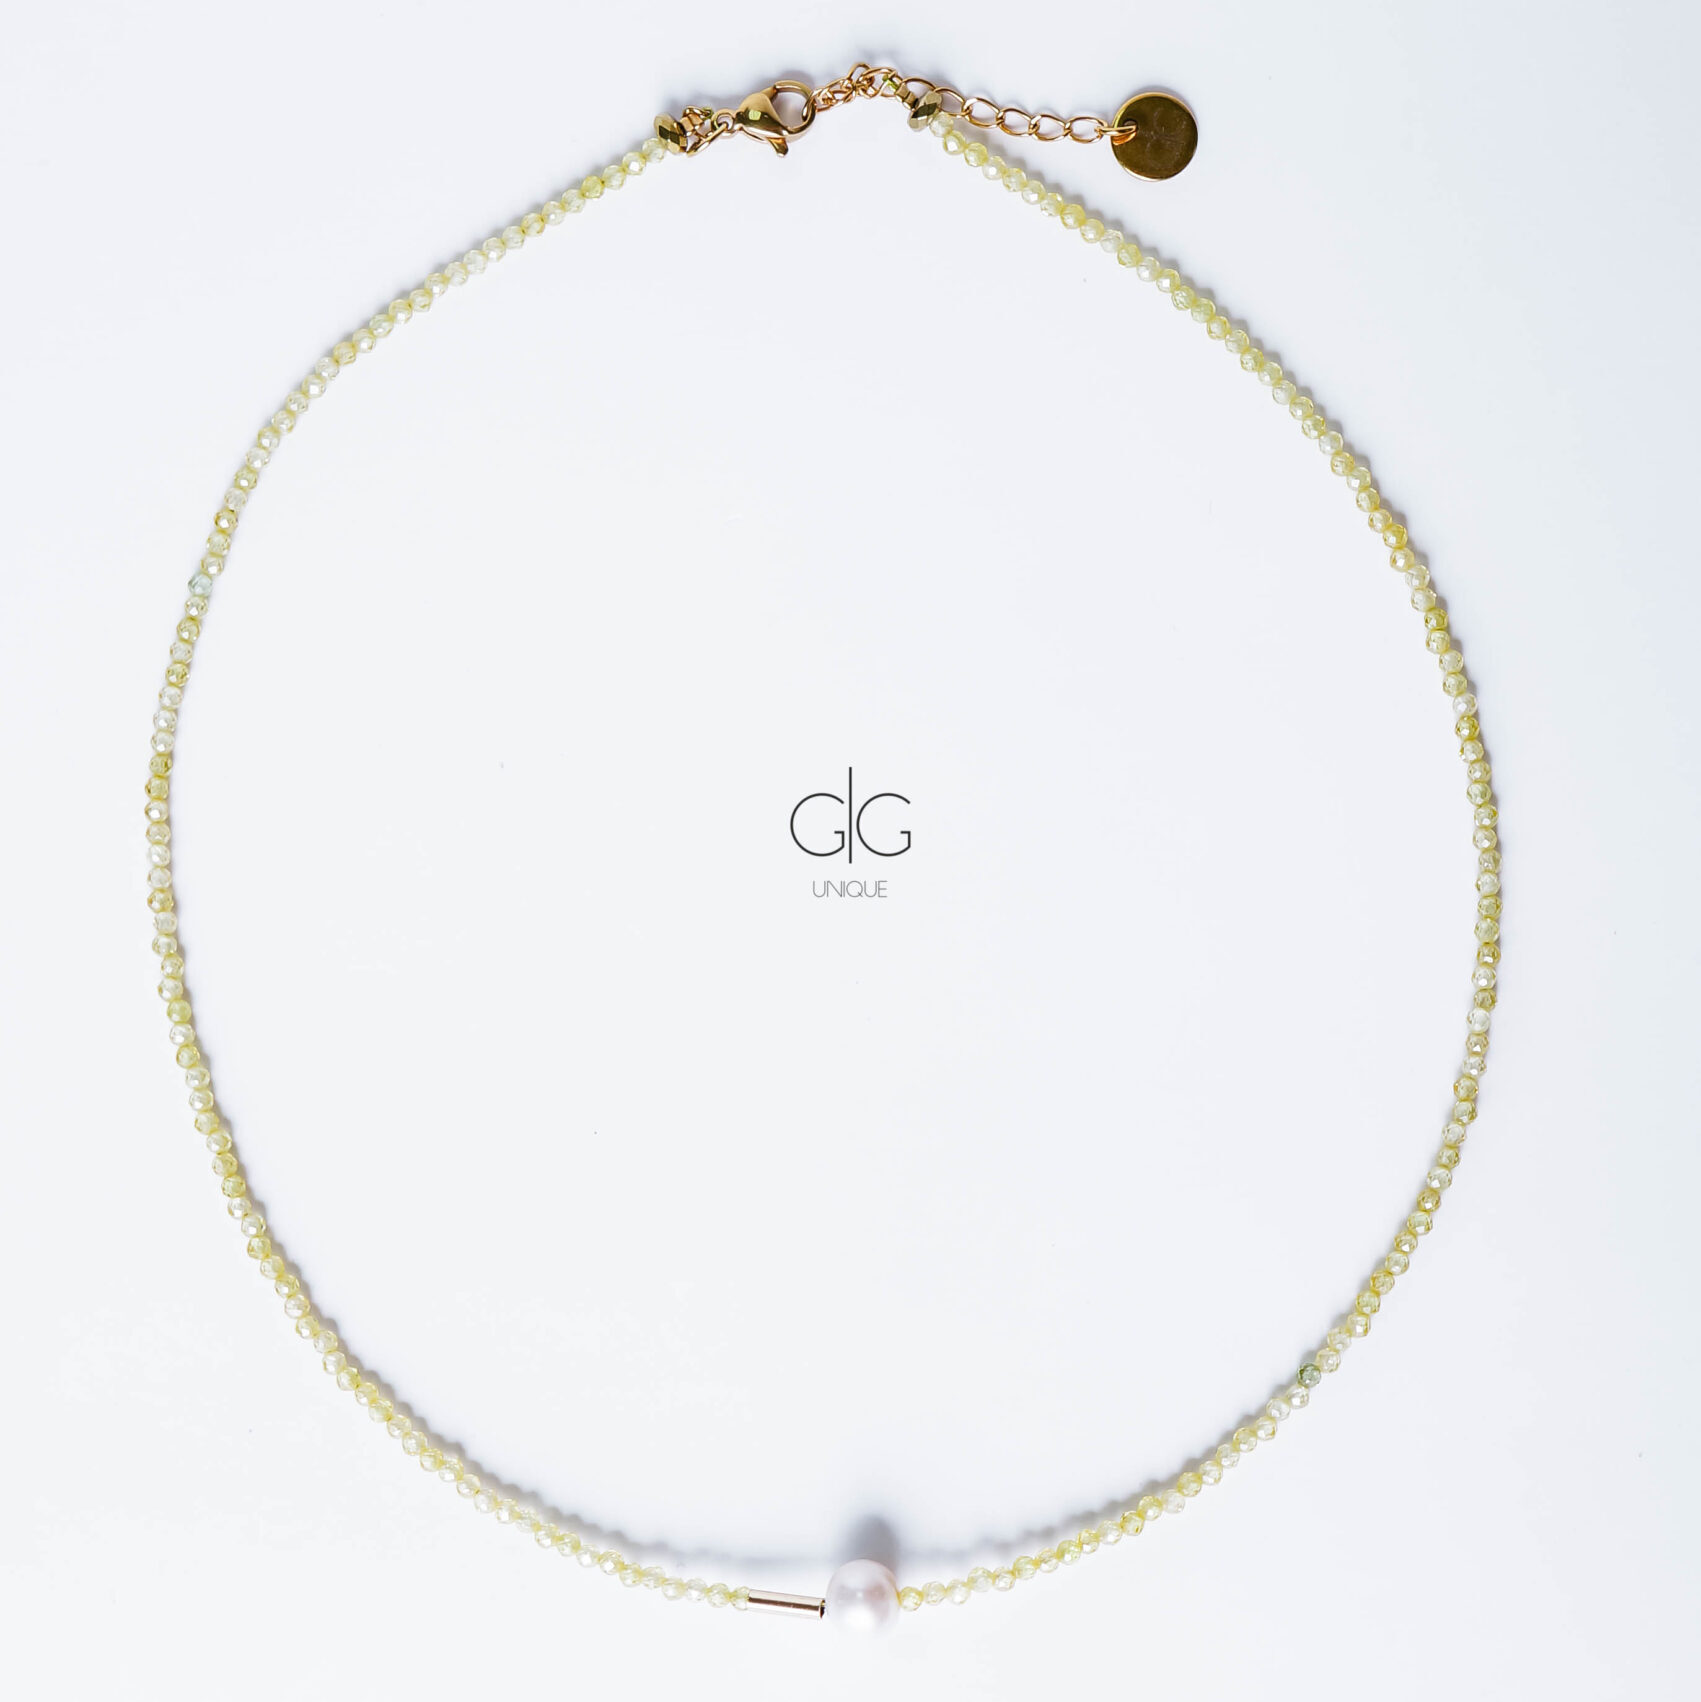 Yellow zircon necklace with hematite and freshwater pearl – GG UNIQUE